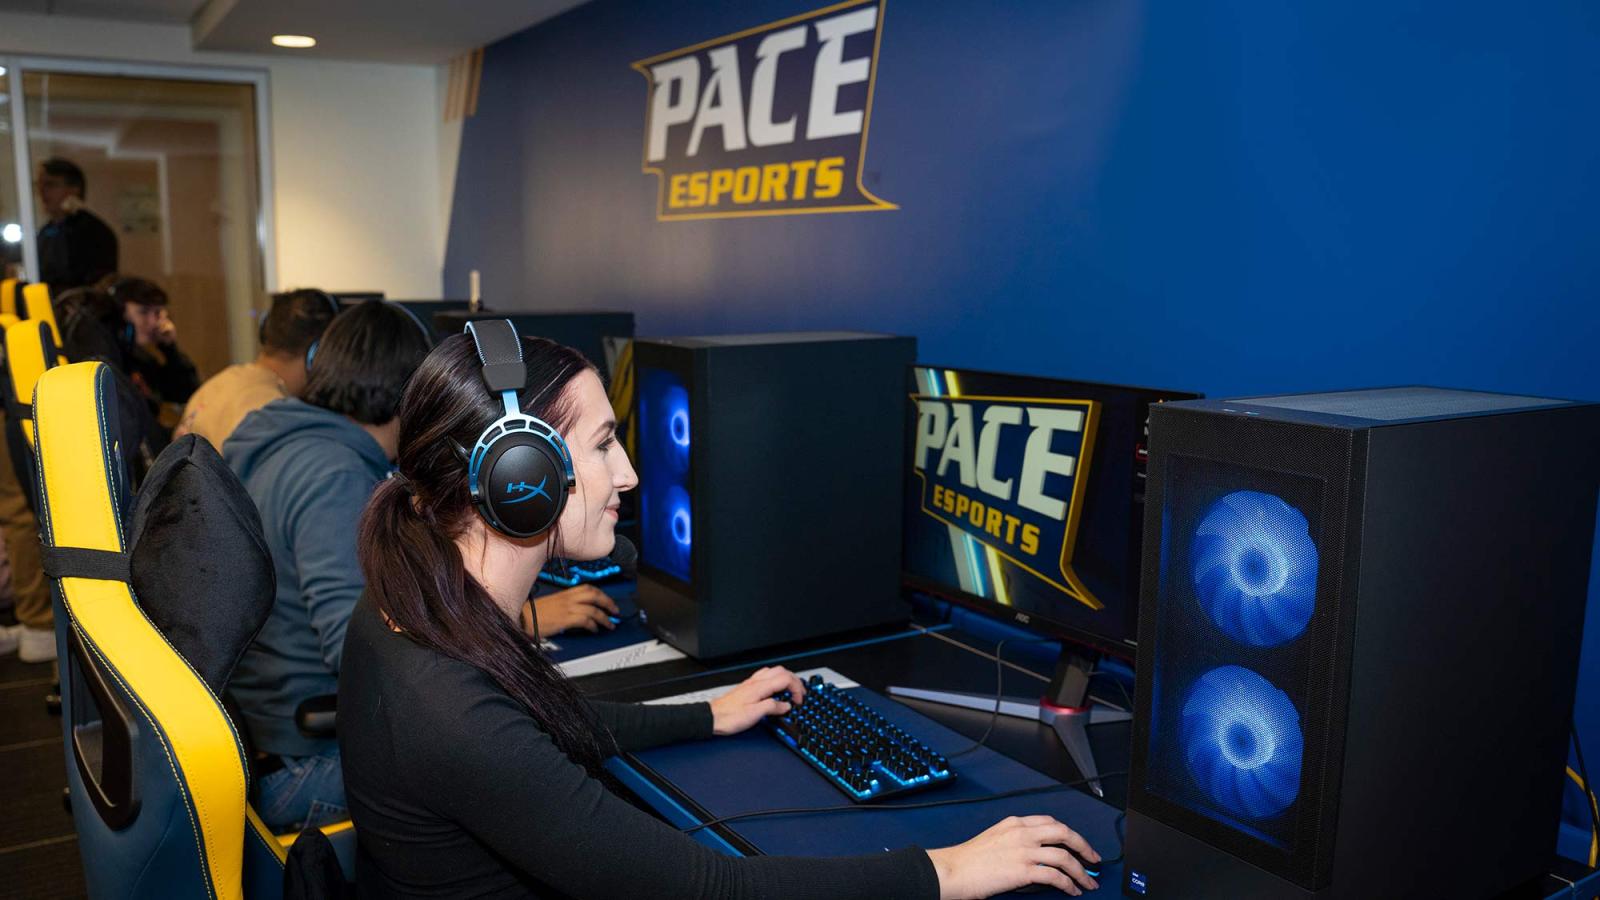 Pace student playing a video game at the university eSports Arena